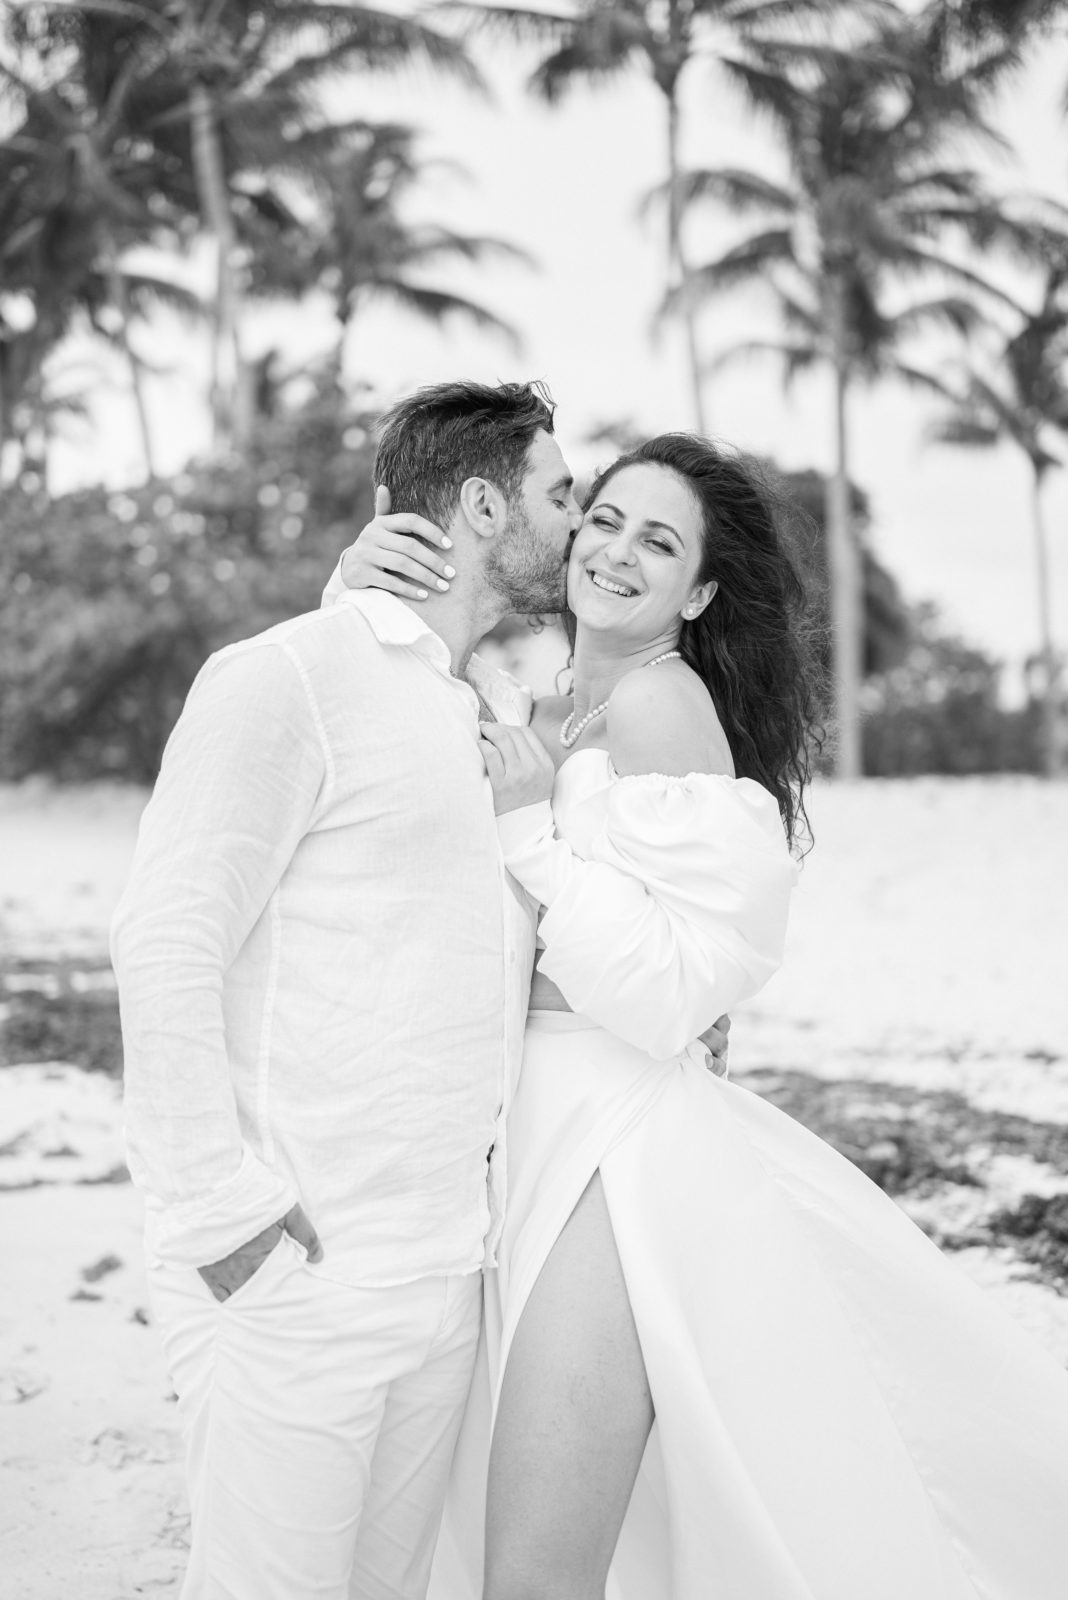 Black and white portrait of a newly wed couple in West Palm Beach, FL